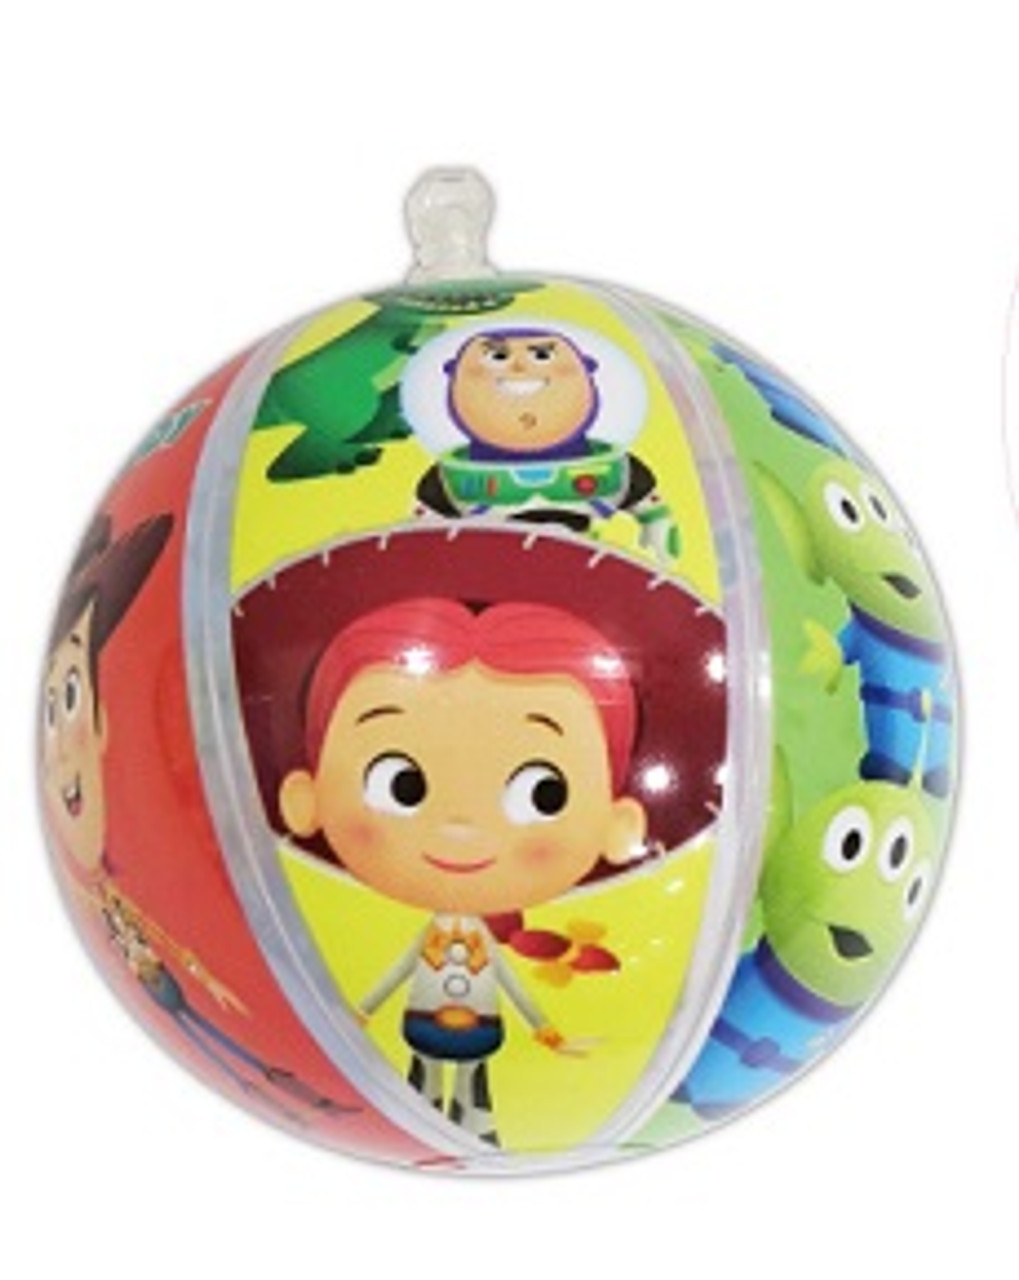 TOY STORY / CARS BALL 5 IN